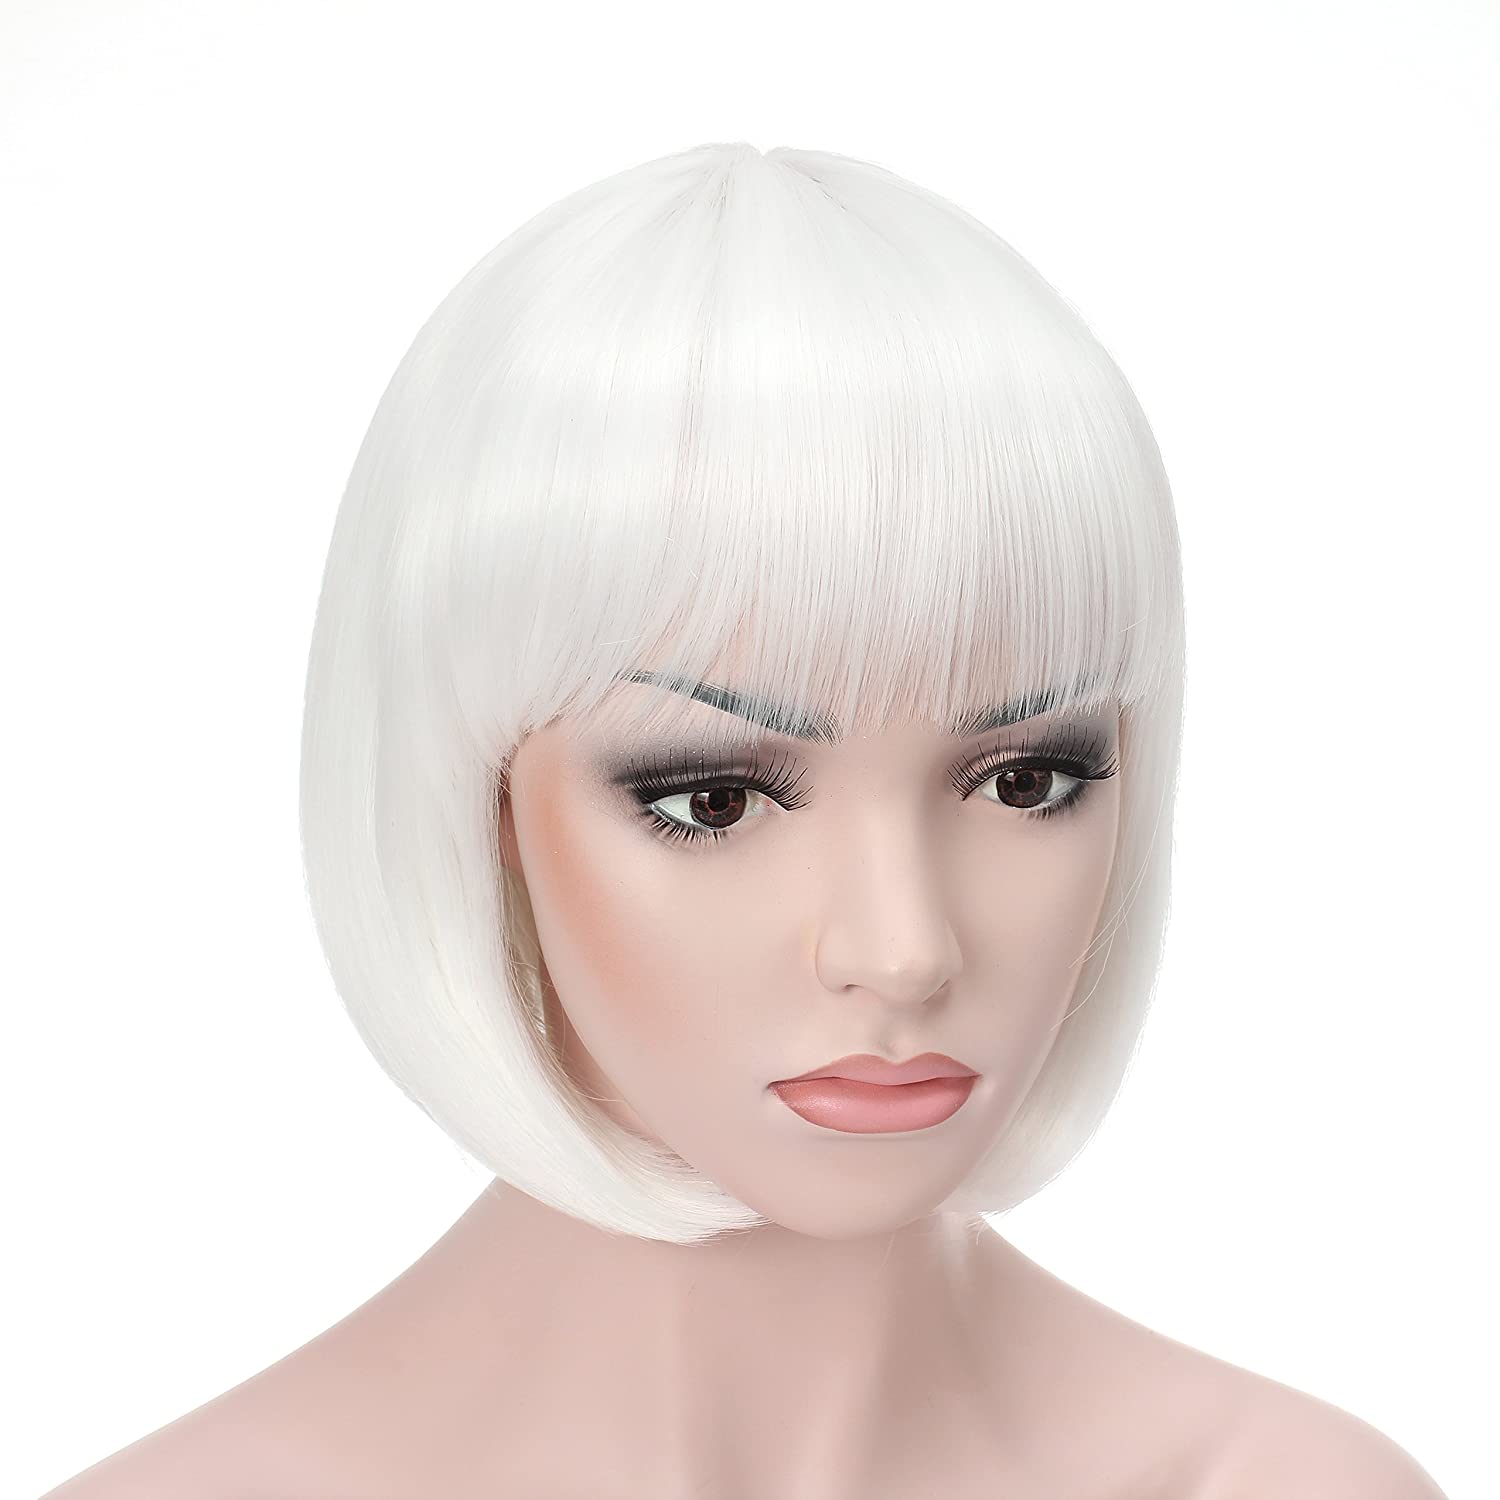 Price:$16.99    OneDor 10" Short Straight Hair Flapper Cosplay Costume Bob Wig (1001# - White)  Beauty